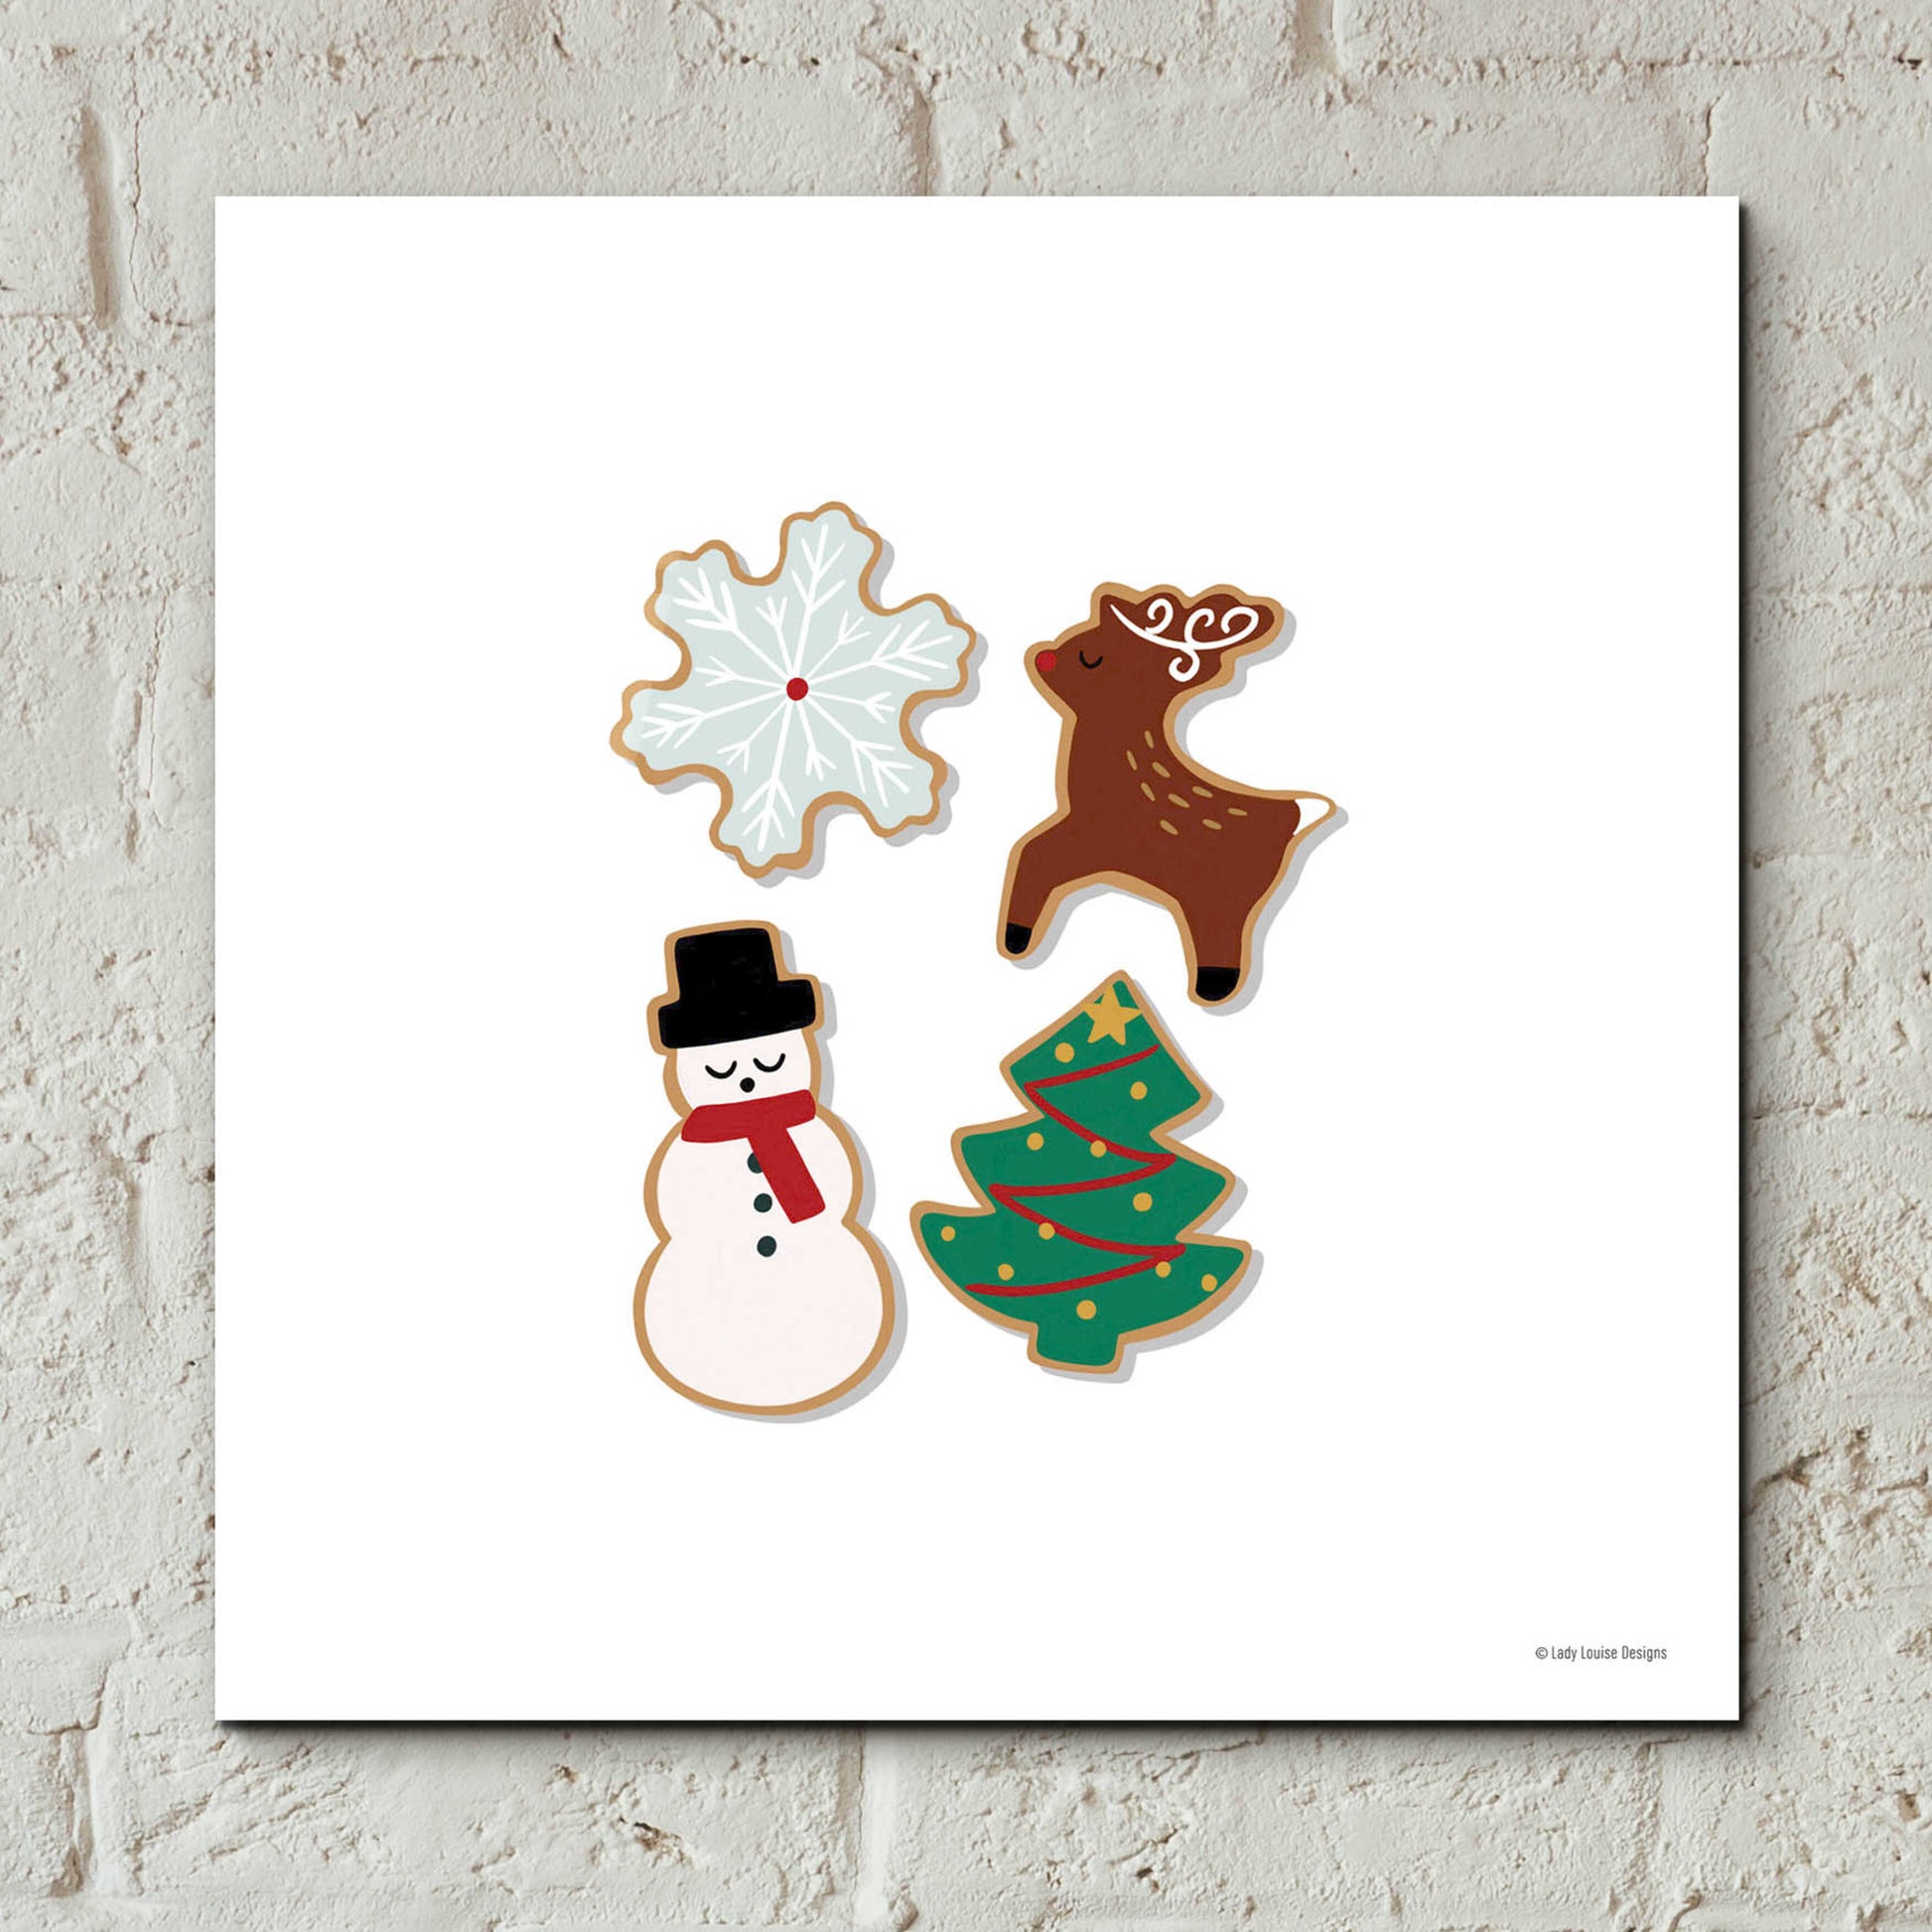 Epic Art 'Christmas Cookies' by Lady Louise Designs, Acrylic Glass Wall Art,12x12